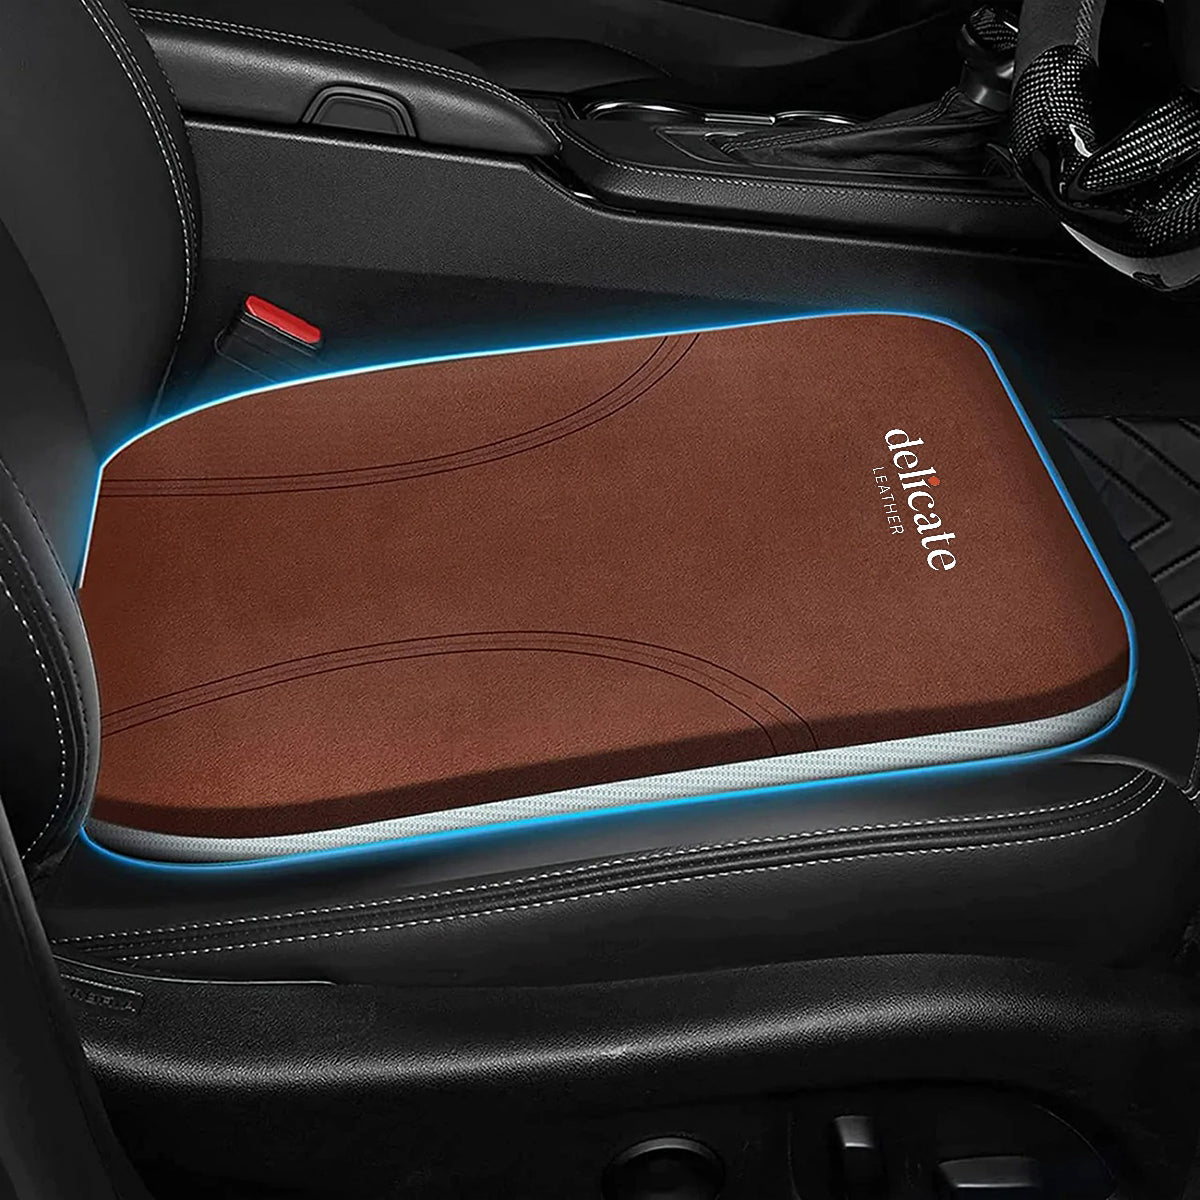 Alfa Romeo Car Seat Cushion: Enhance Comfort and Support for Your Drive